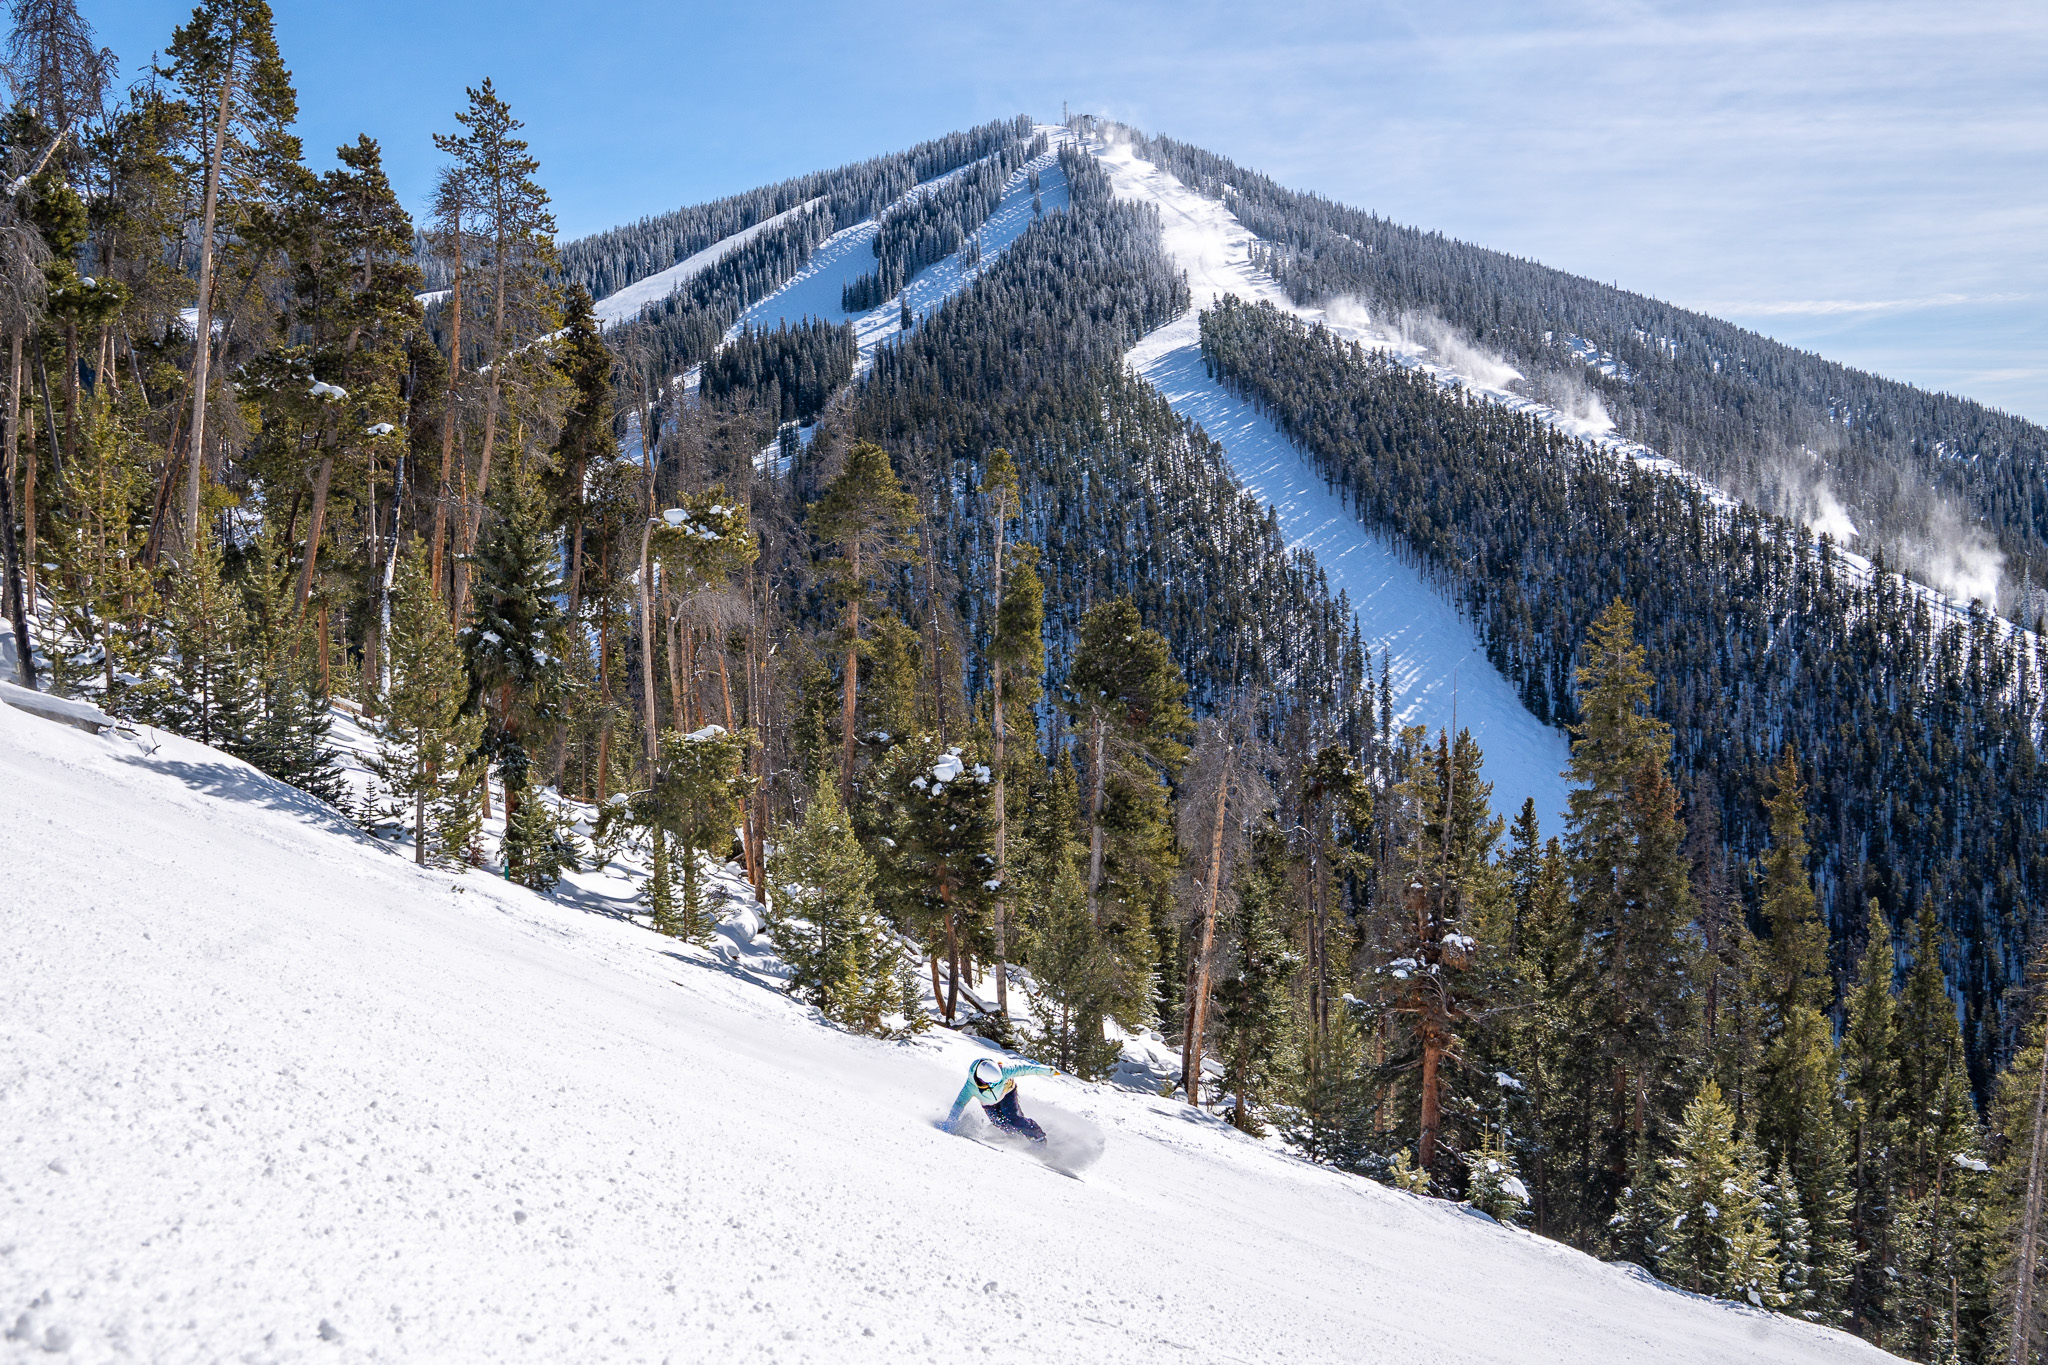 Crashed Toboggan Leads To Another Lawsuit Against Vail Resorts